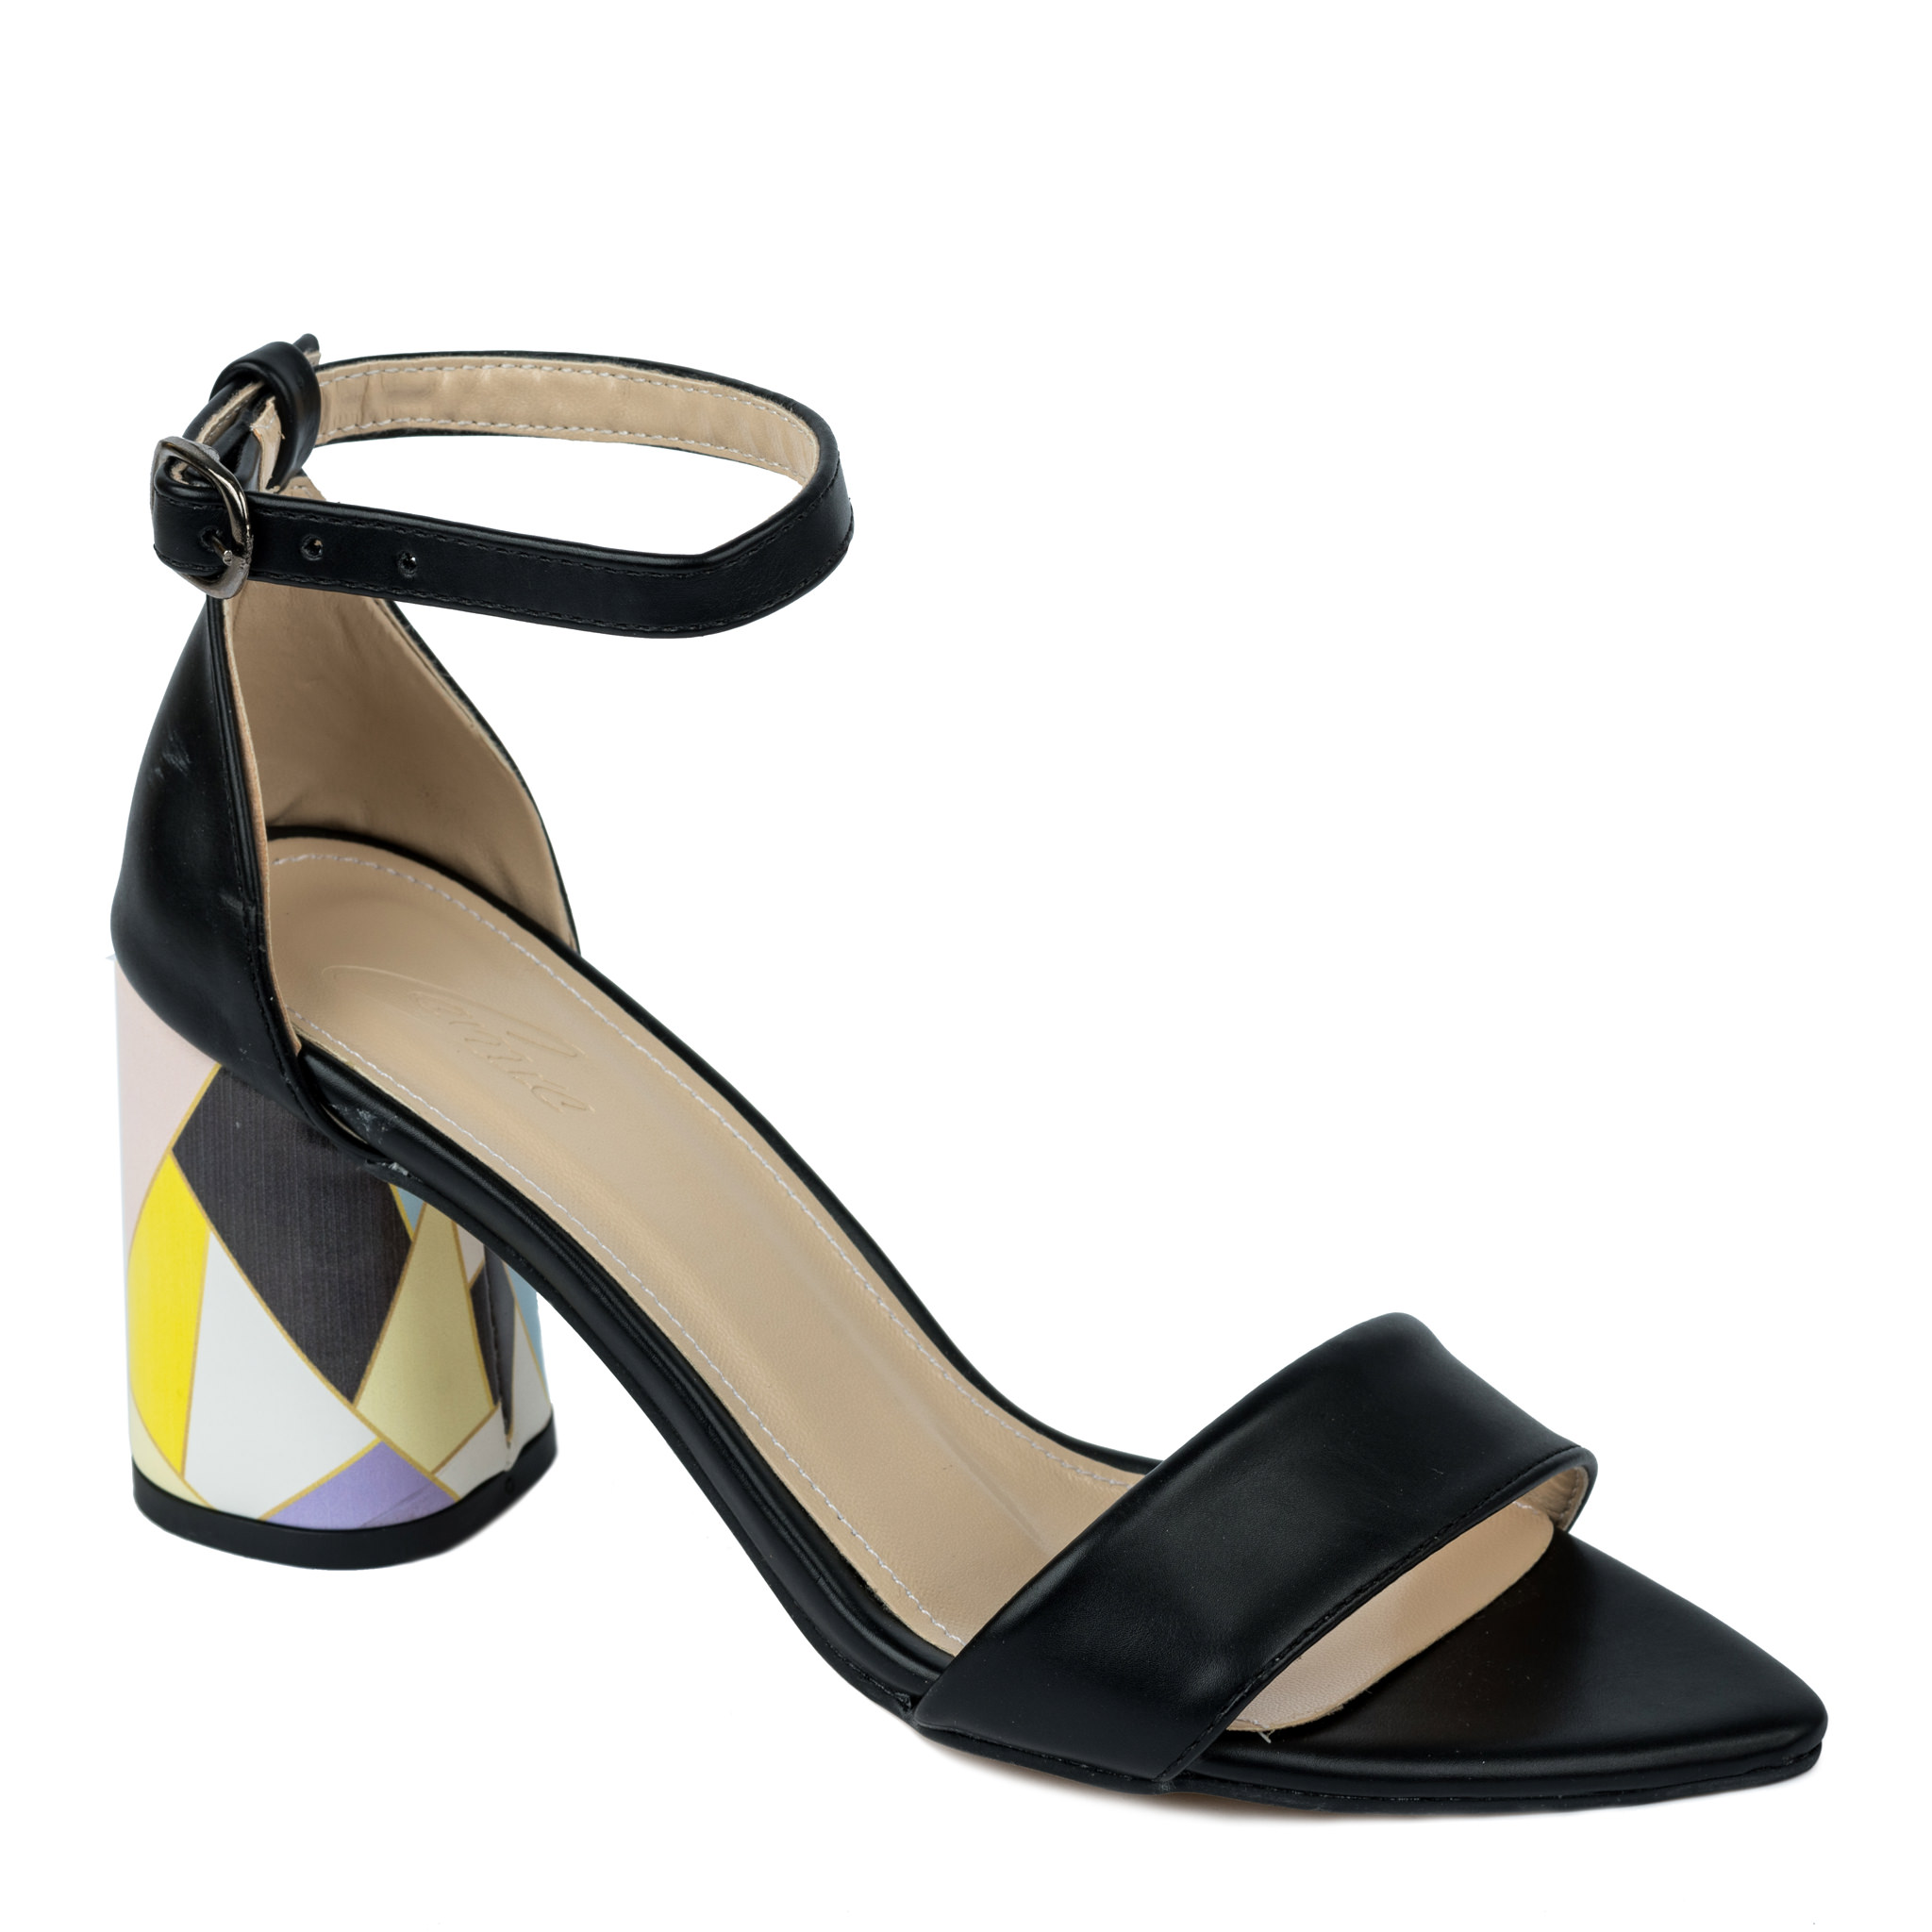 SANDALS WITH COLORFUL BLOCK HEEL - BLACK